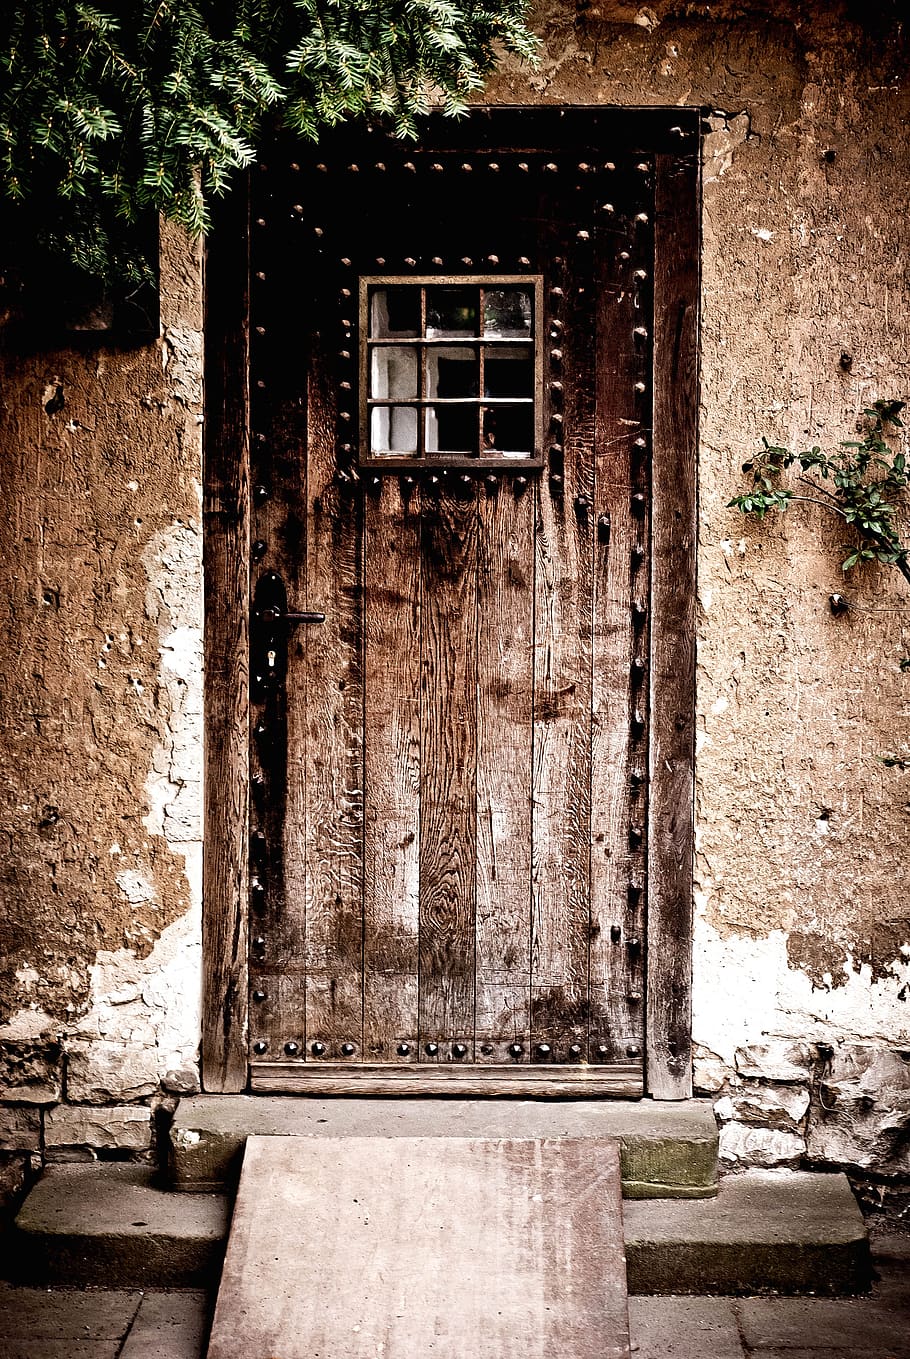 window, architecture, old, house, abandoned, wall, door, stone, building, rustic